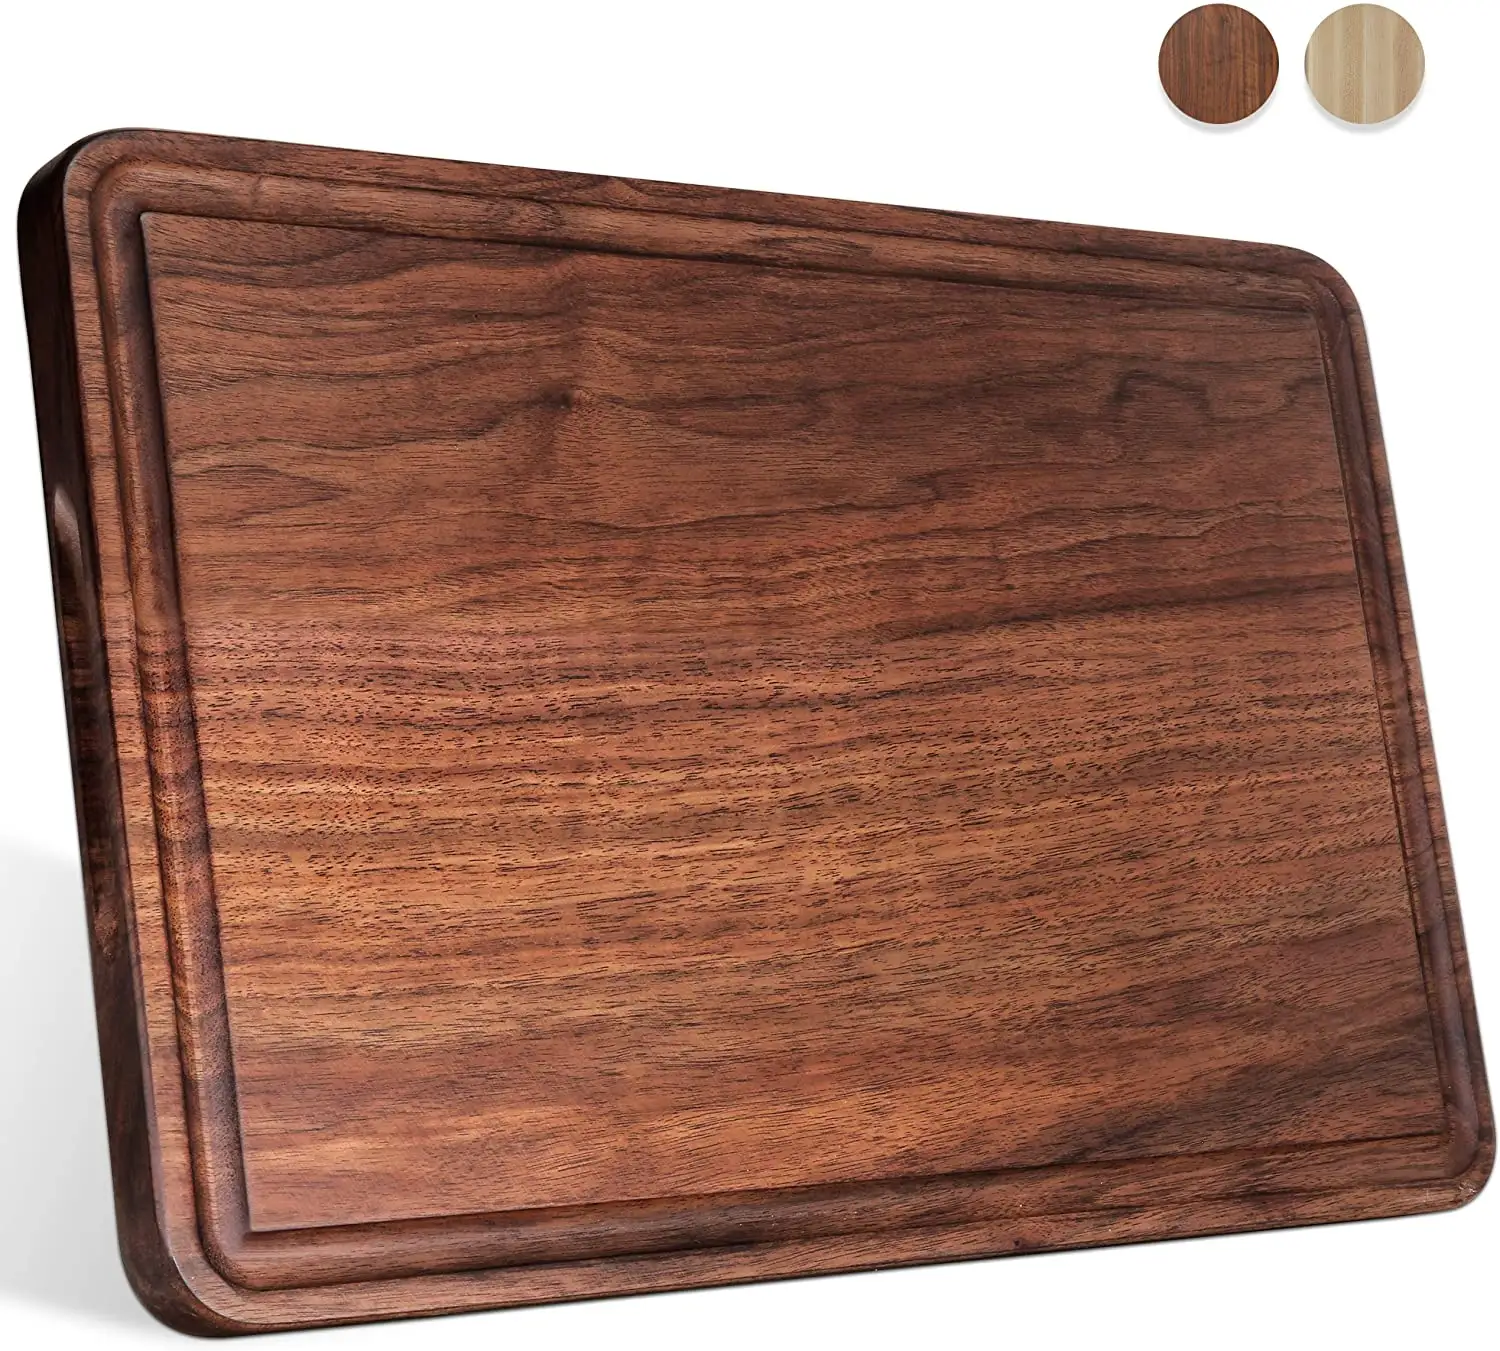 Large Walnut Wood Cutting Board für Kitchen 17x11 Cheese Charcuterie Board (Free Gift Box) Extra Thick Reversible Butcher Block